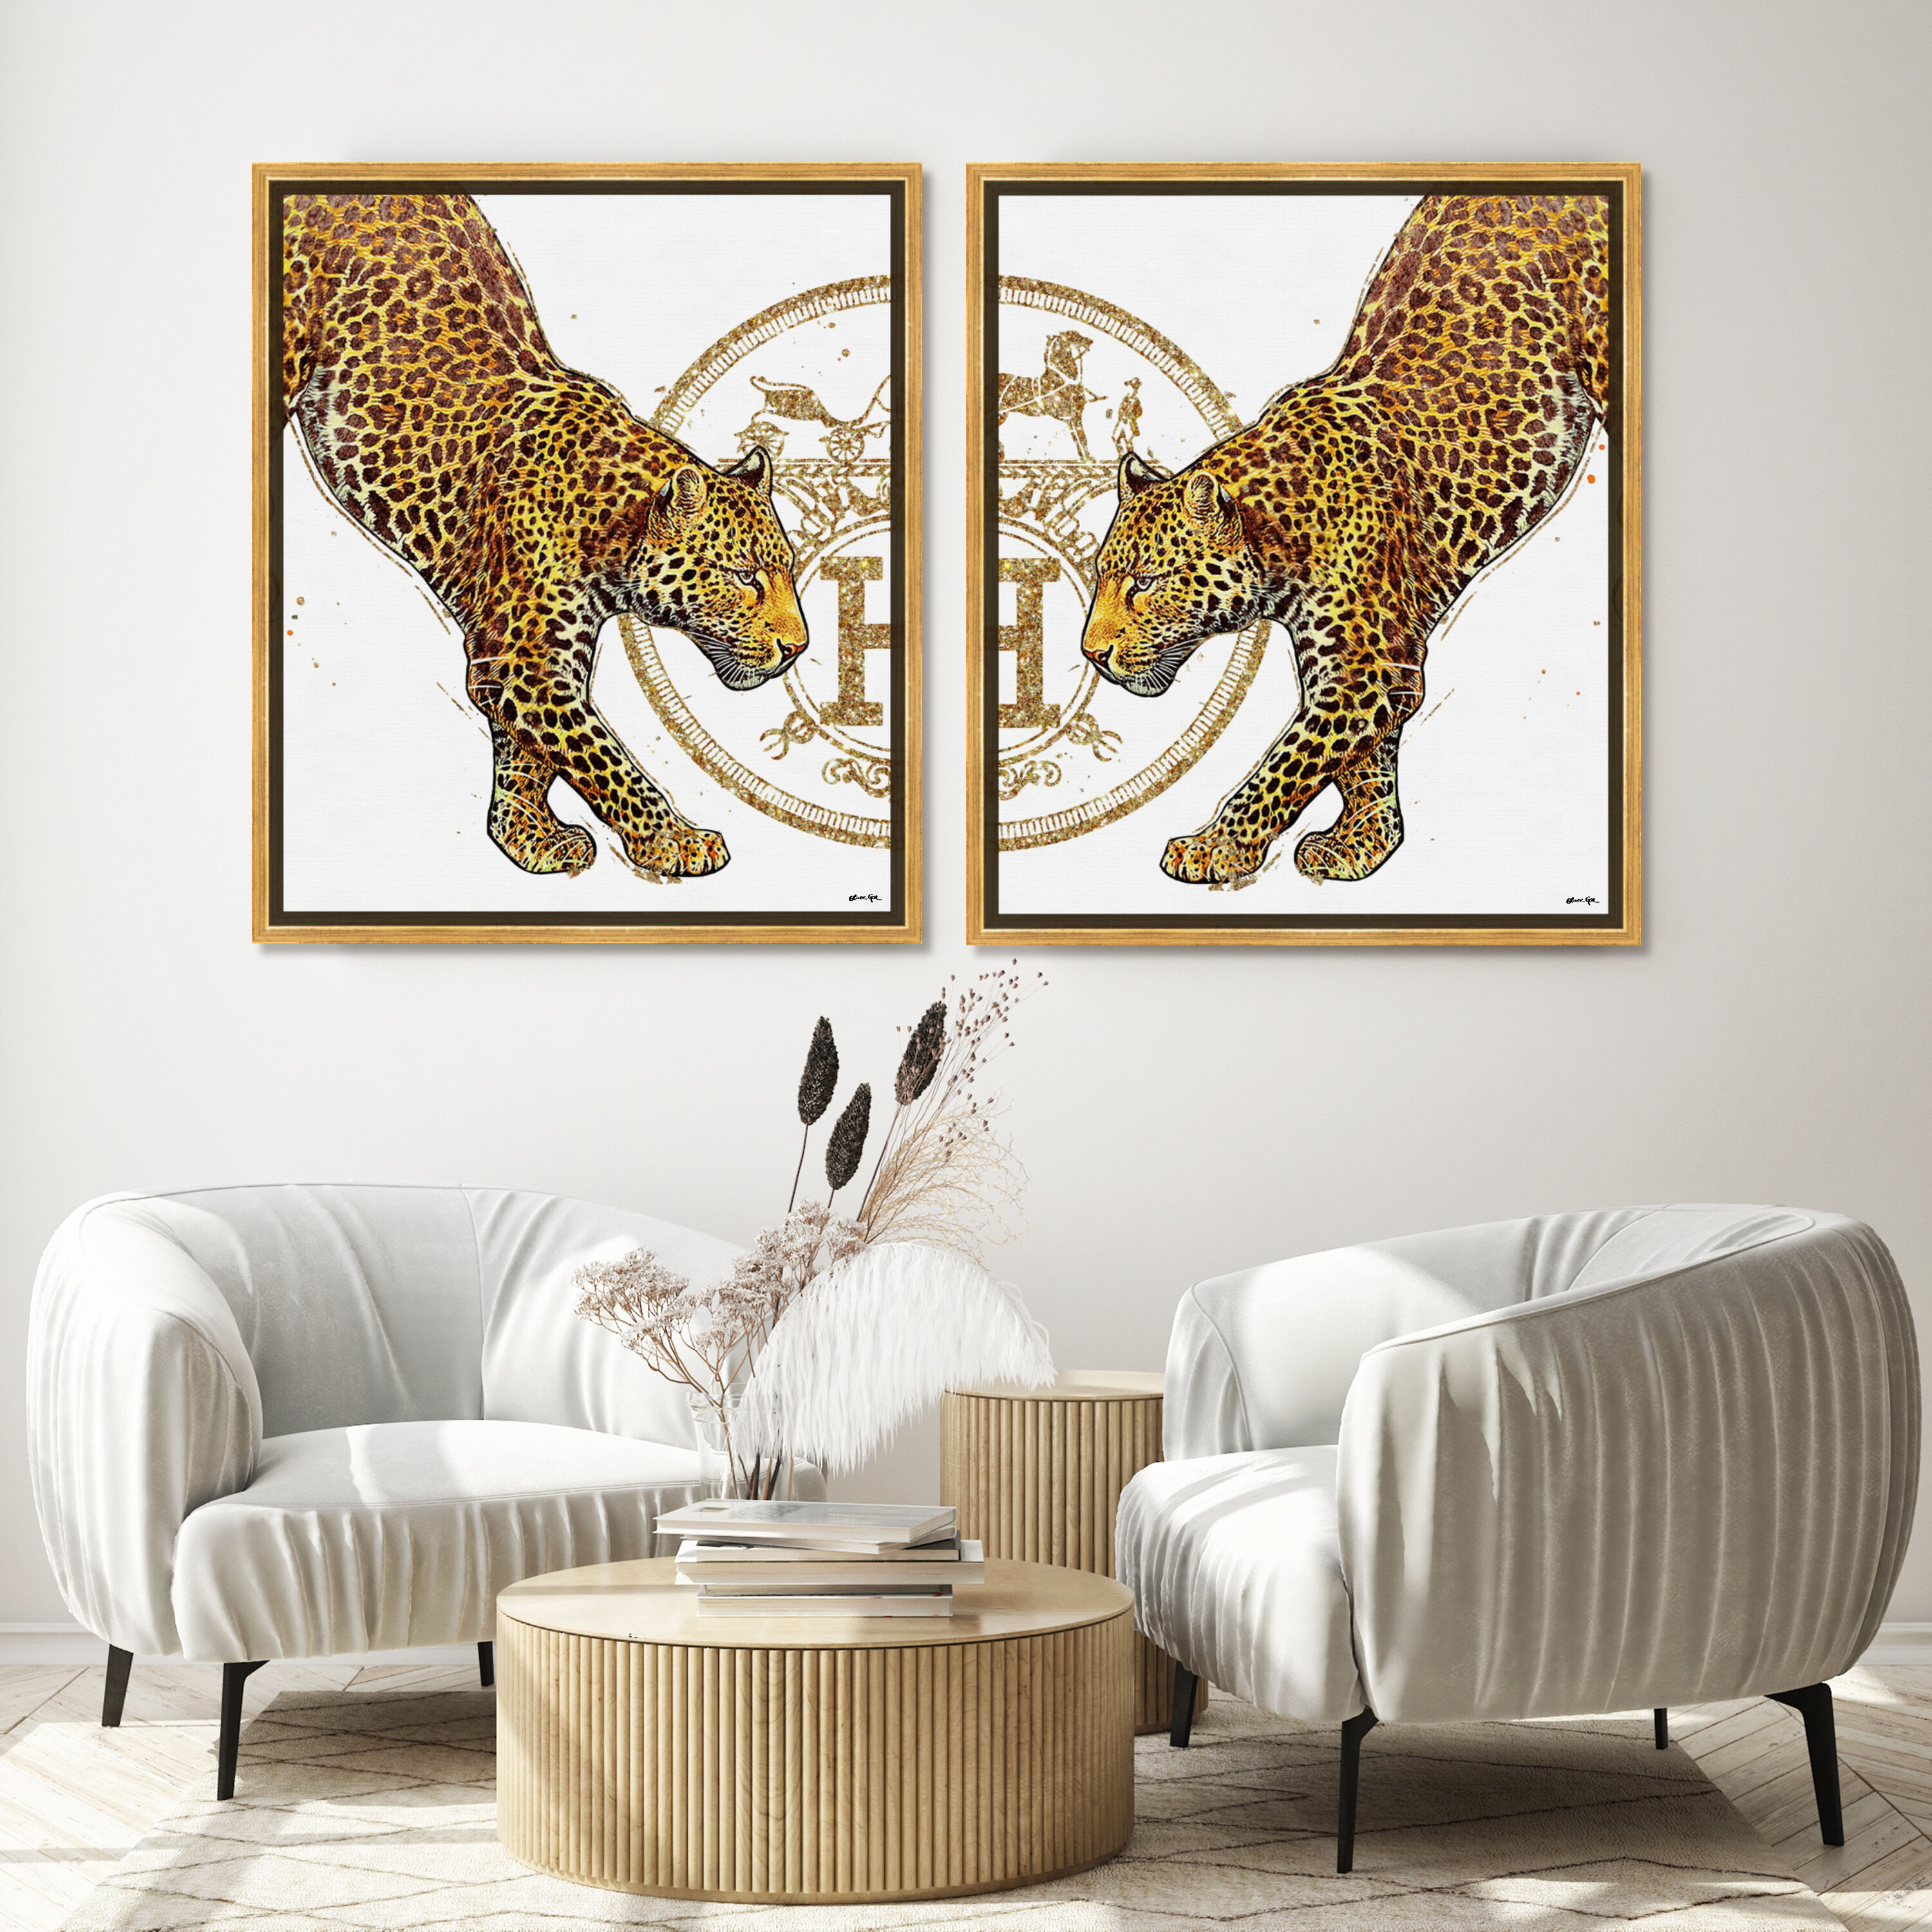 Animal Duos | Gallery Wall Art Collection | Oliver Gal